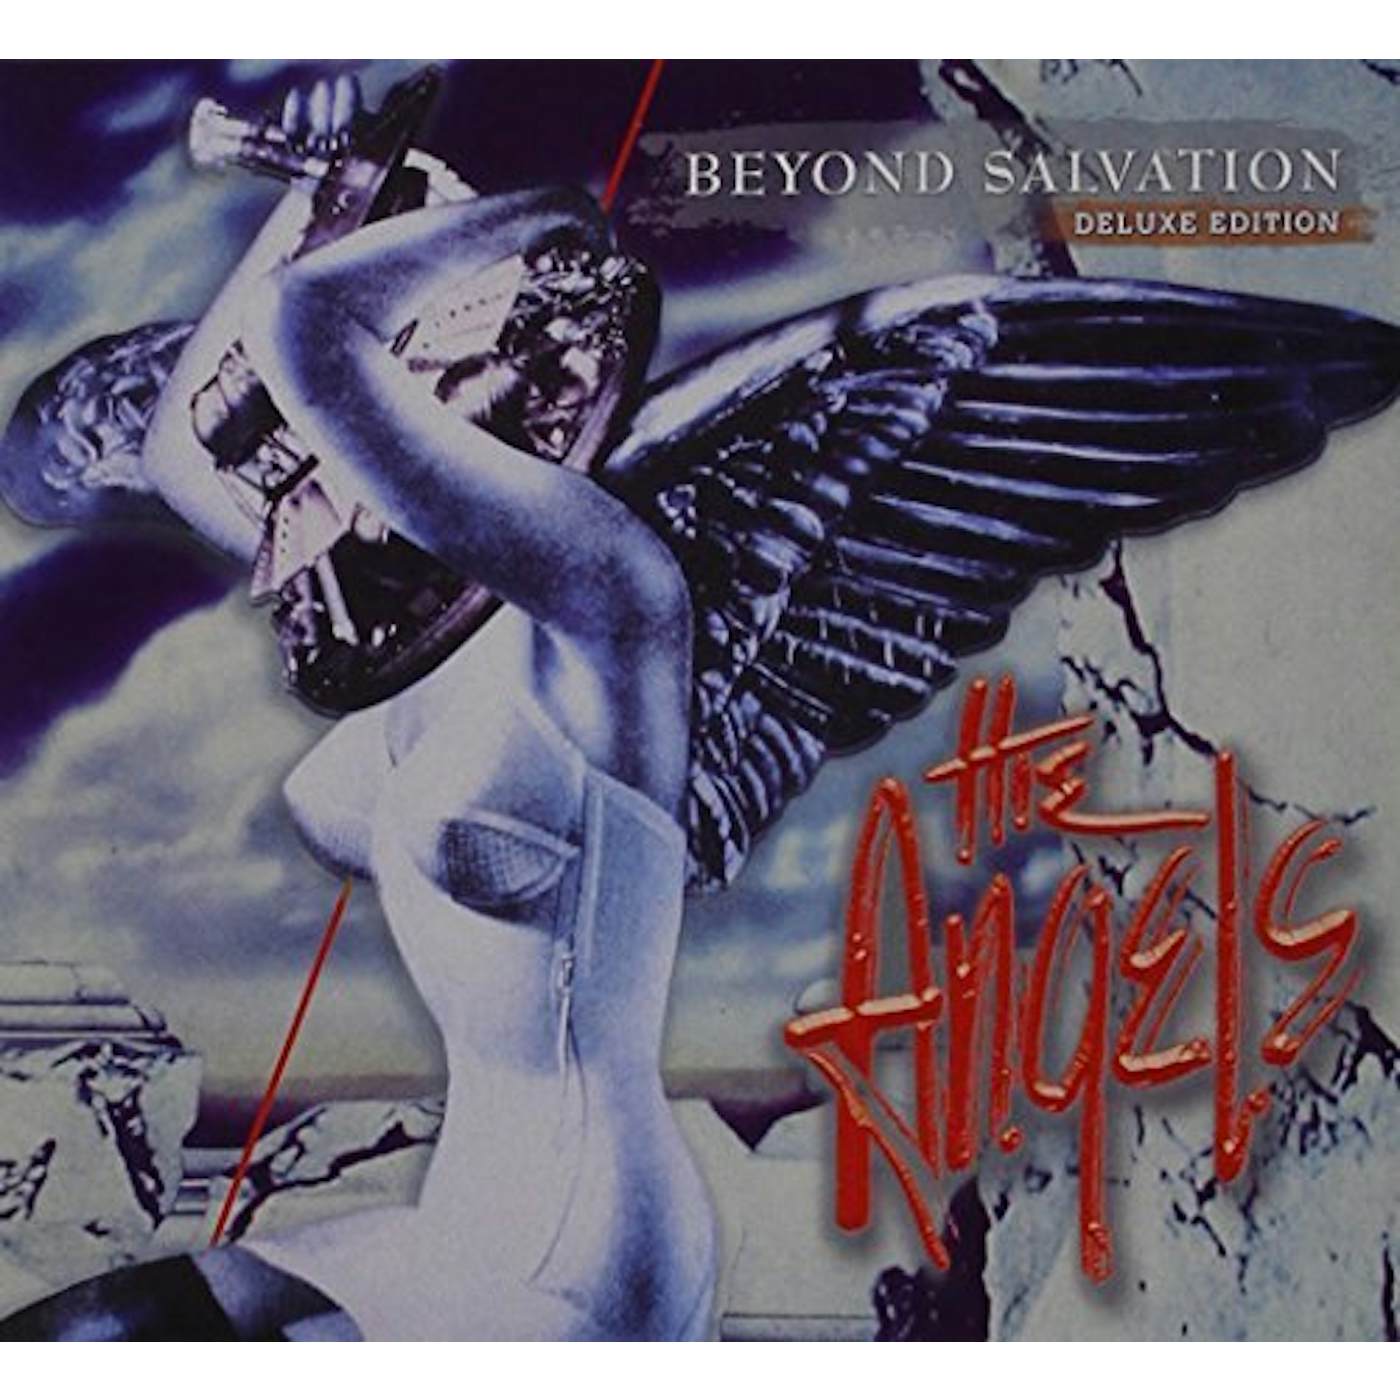 The Angels BEYOND SALVATION CD